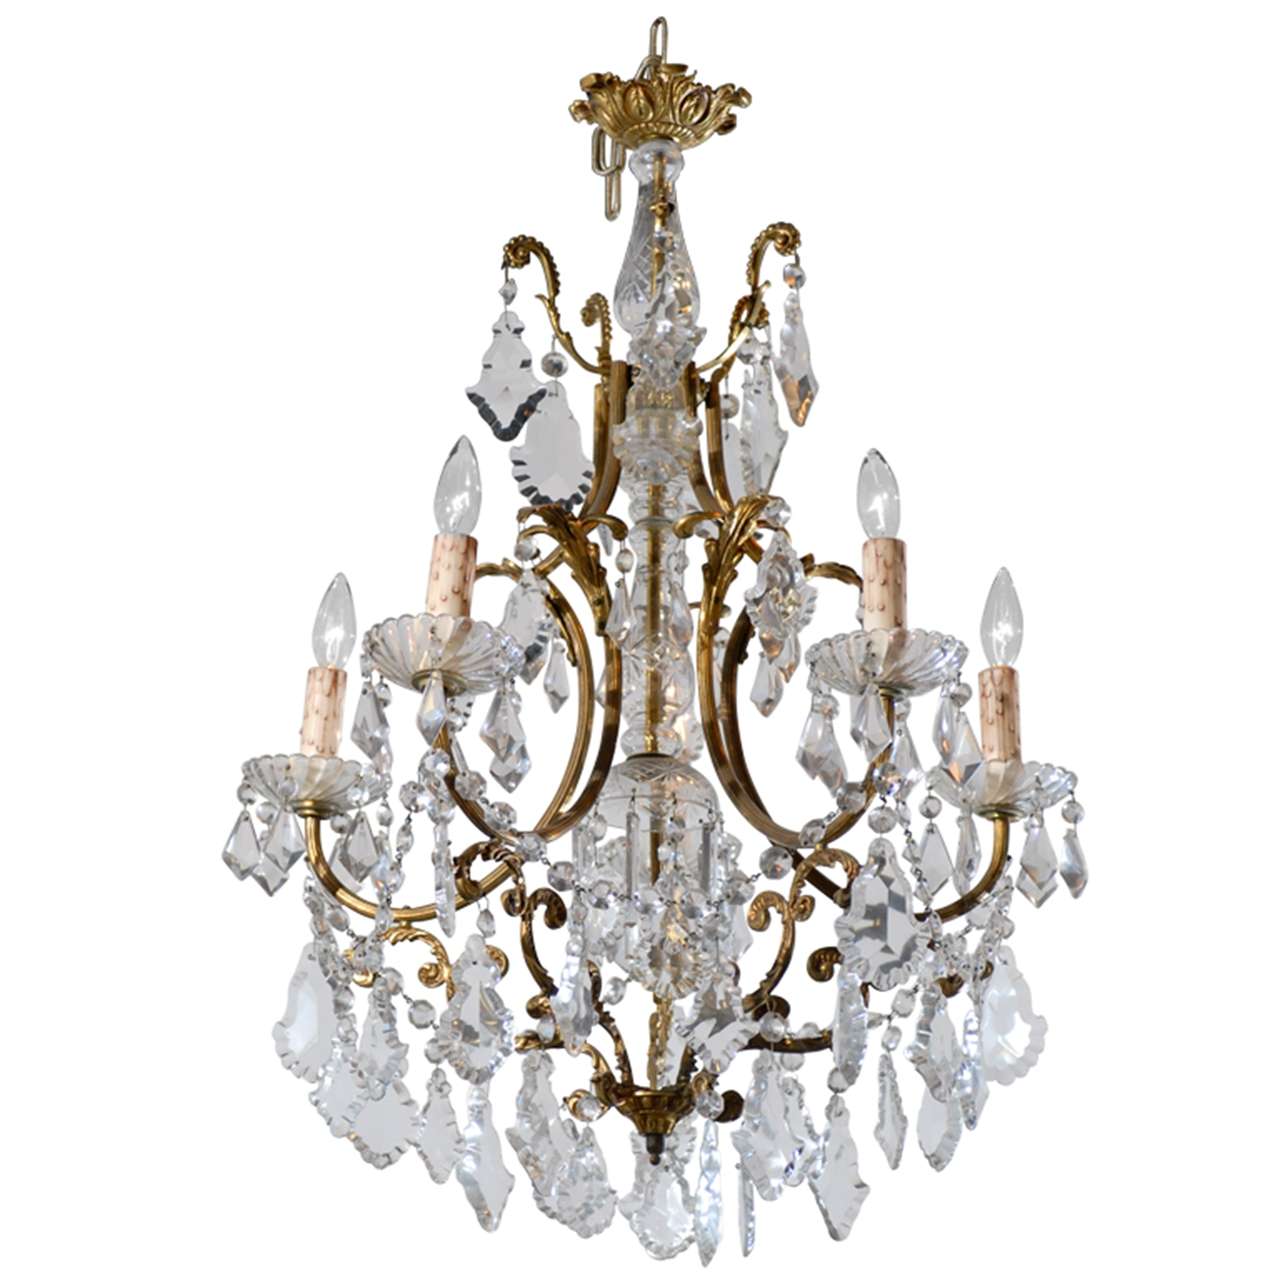 French Rococo Style Late 19th Century, Six-Light Crystal and Bronze Chandelier